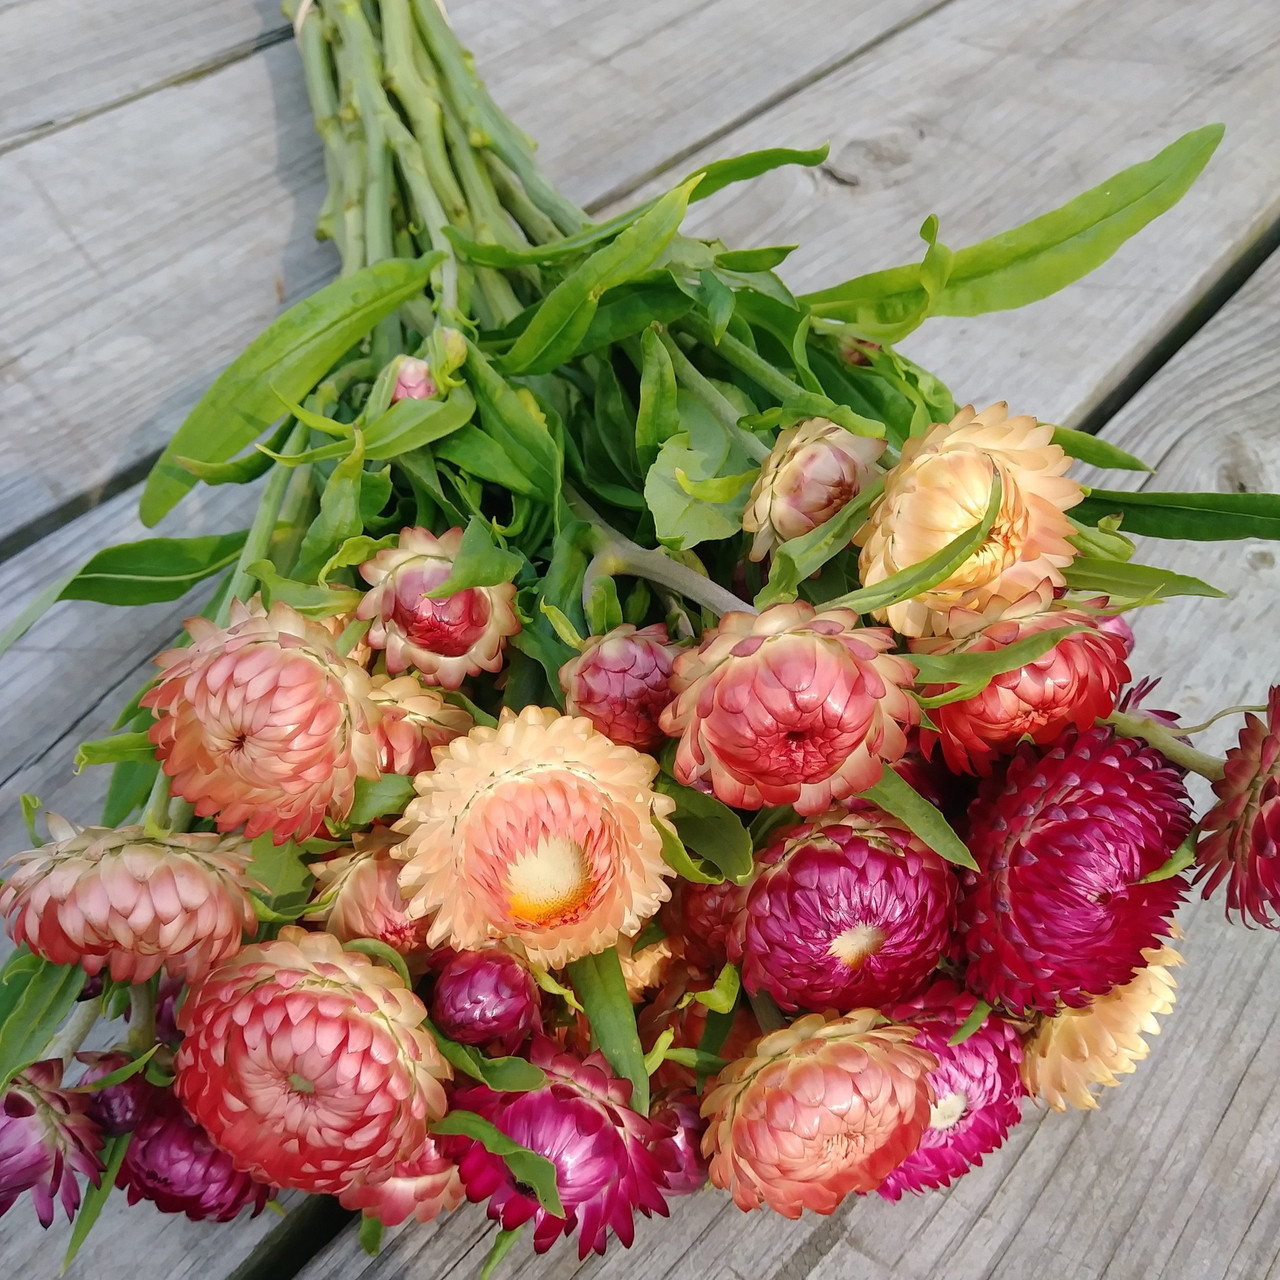 Strawflower Seed, Helichrysum Mixed Peach and Apricot Shades